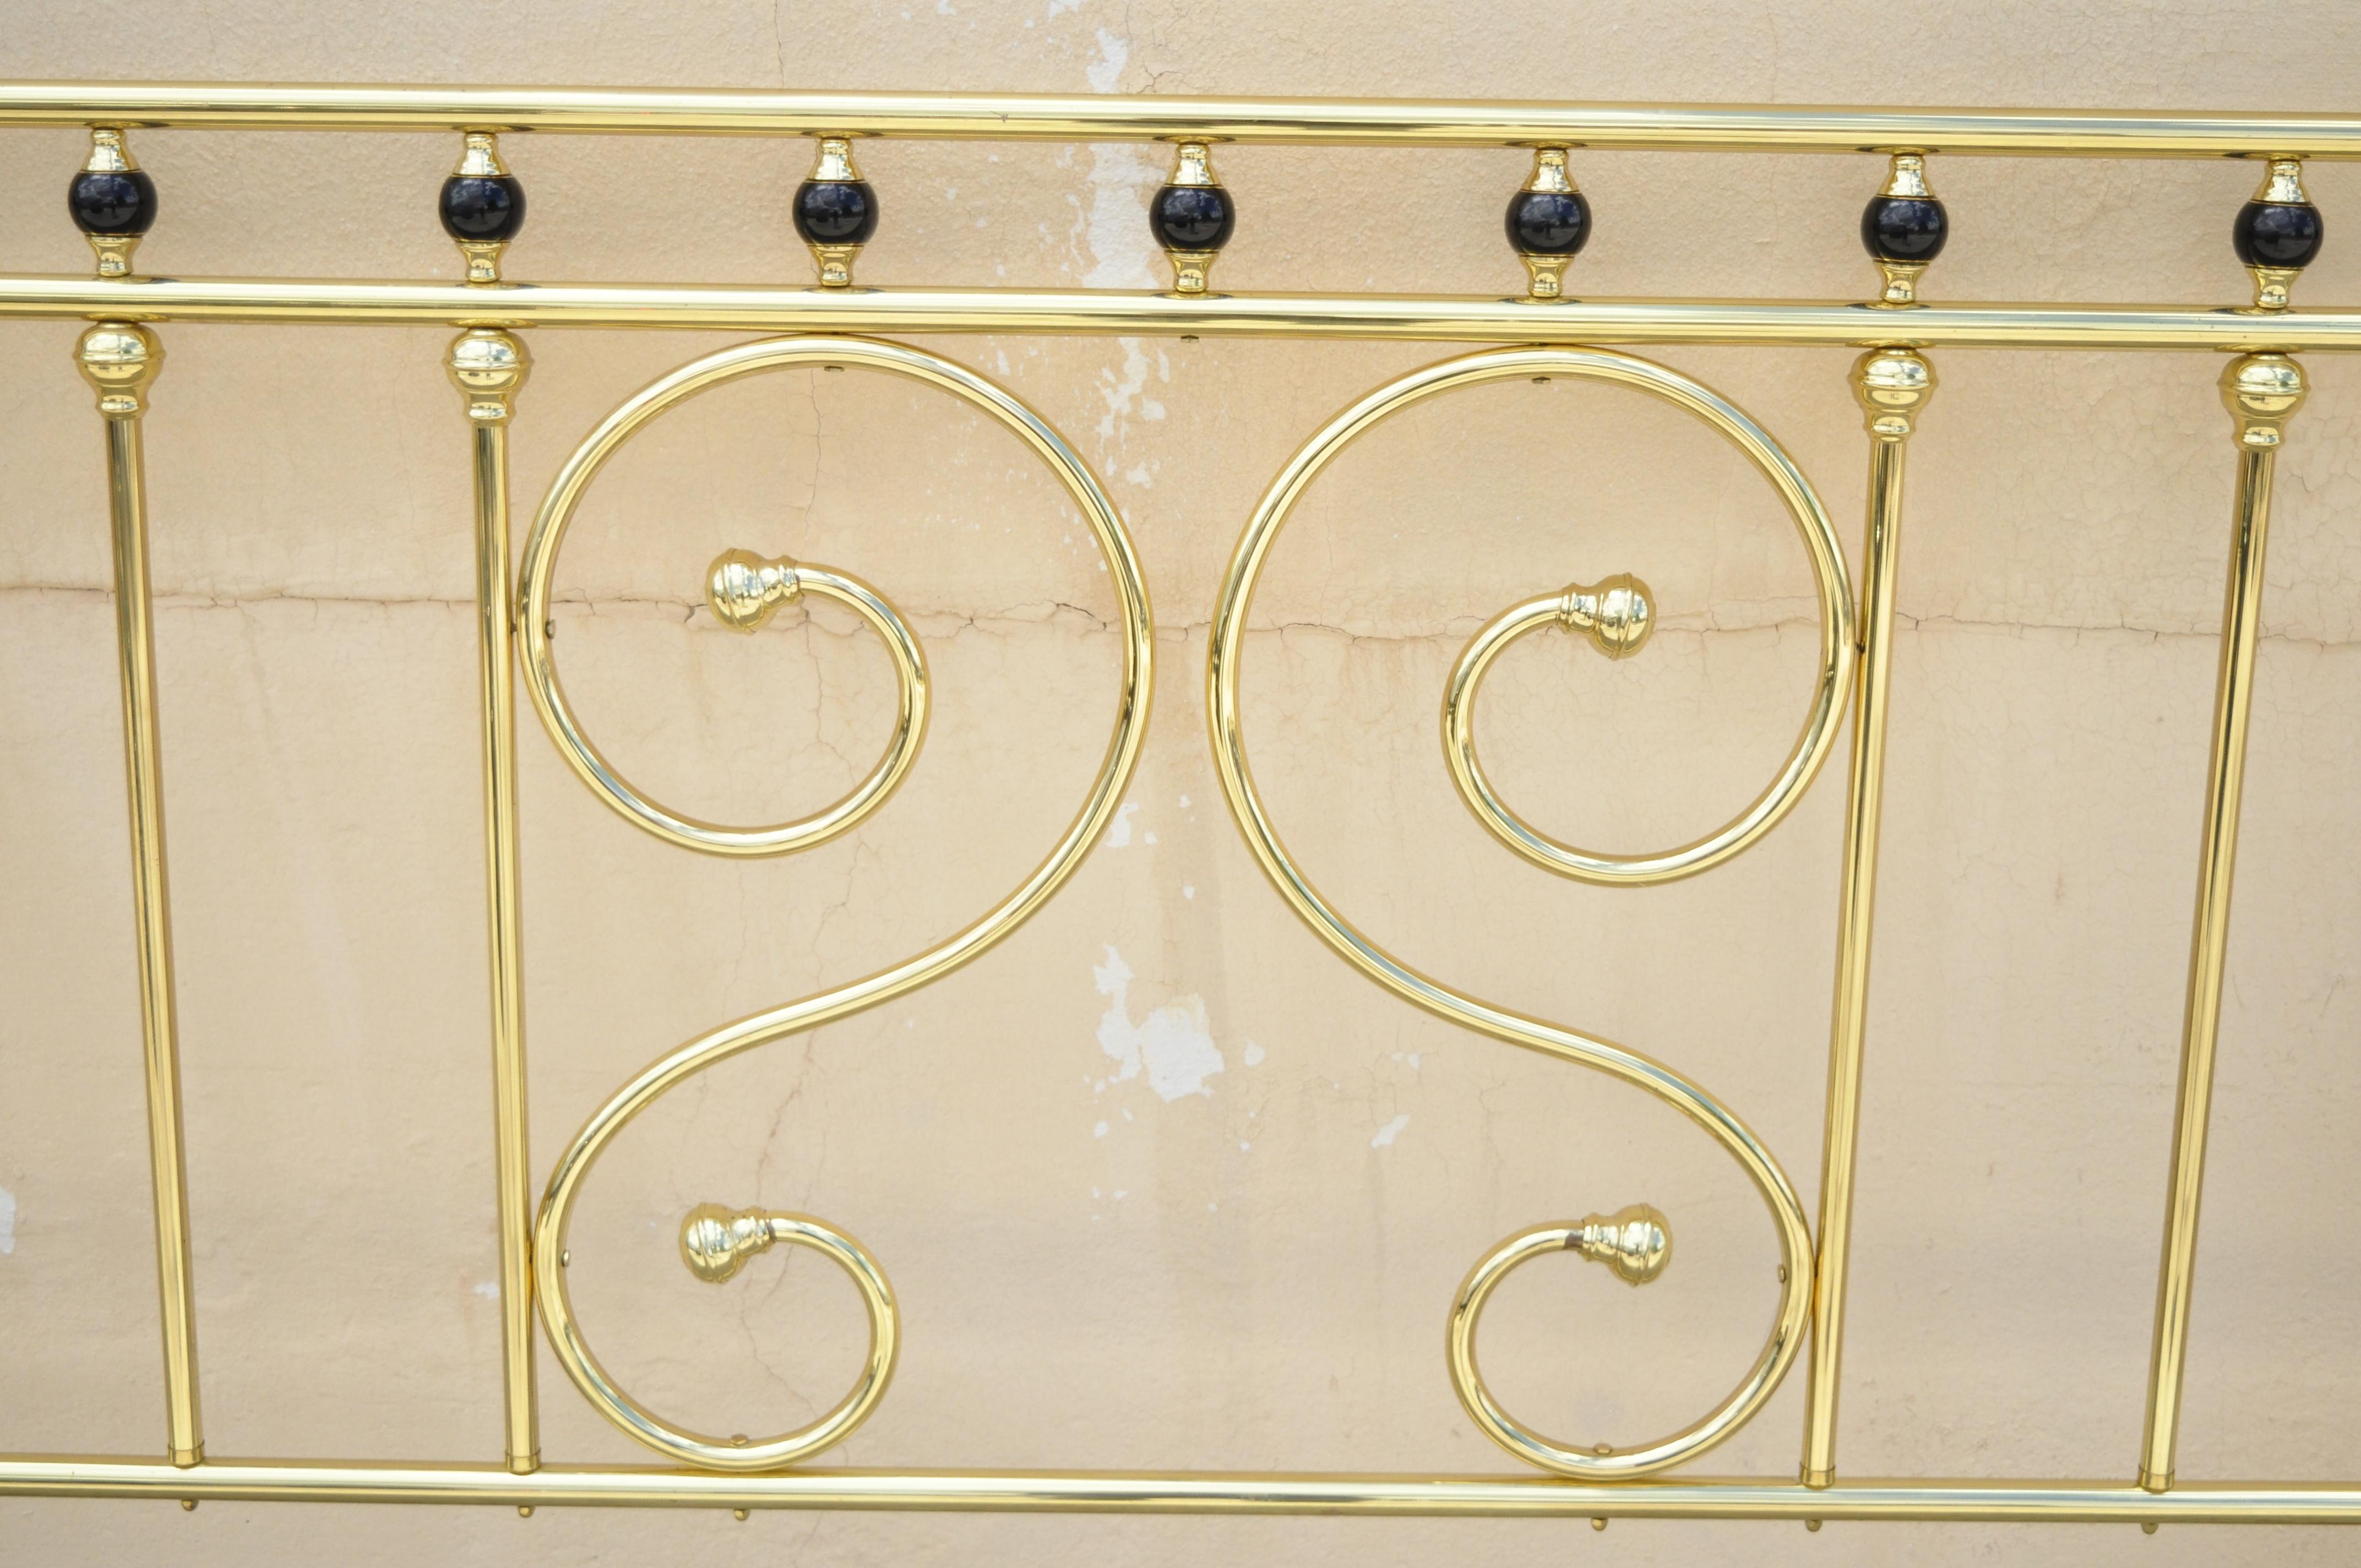 Vintage brass Victorian style king size bed headboard by Wesley Allen Inc. Item features the original label, quality American craftsmanship, great style and form, circa late 20th century. Measurements: 56